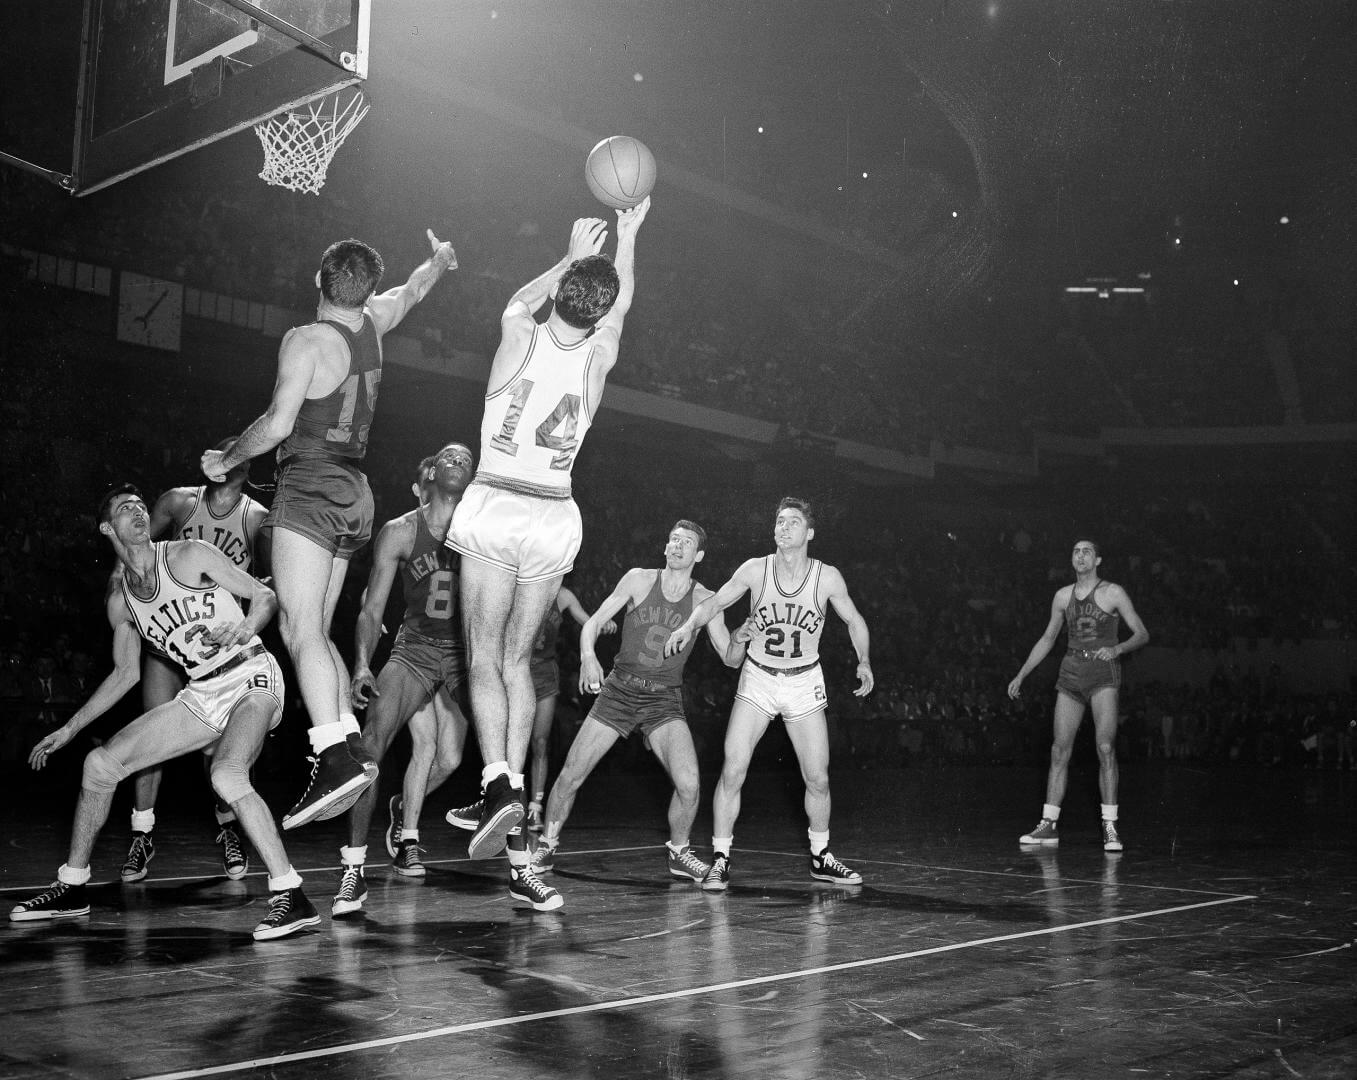 Bob Cousy (14) of the Boston Celtics takes a rebound off the backboard after an attempted basket by Dick McGuire (15) of the New York Knickerbockers in the fourth quarter of their NBA playoff game at the Boston Garden in Boston, Mass., March 26, 1953. Other identifiable players are: Bob Harris (13) and Bill Sharman (21) of the Celtics: Nat Clifton (8) and Ernie Vandeweghe (9) both of the Knicks. The Celtics won 86-70. (AP Photo/Bill Chaplis)